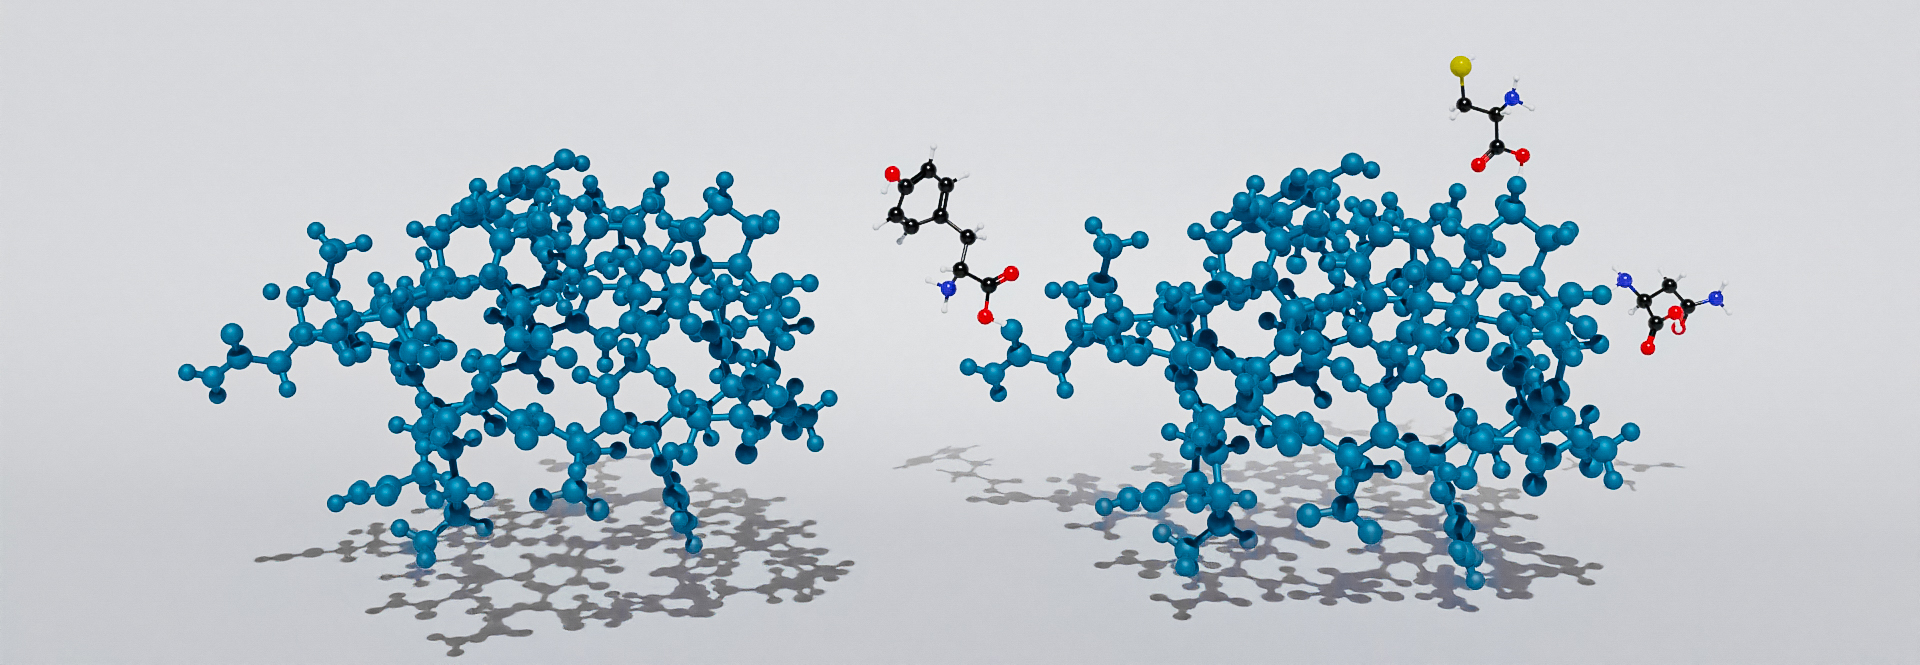 Analysis of Amino Acid Modifications. 3D render of Amino acid molecular structures